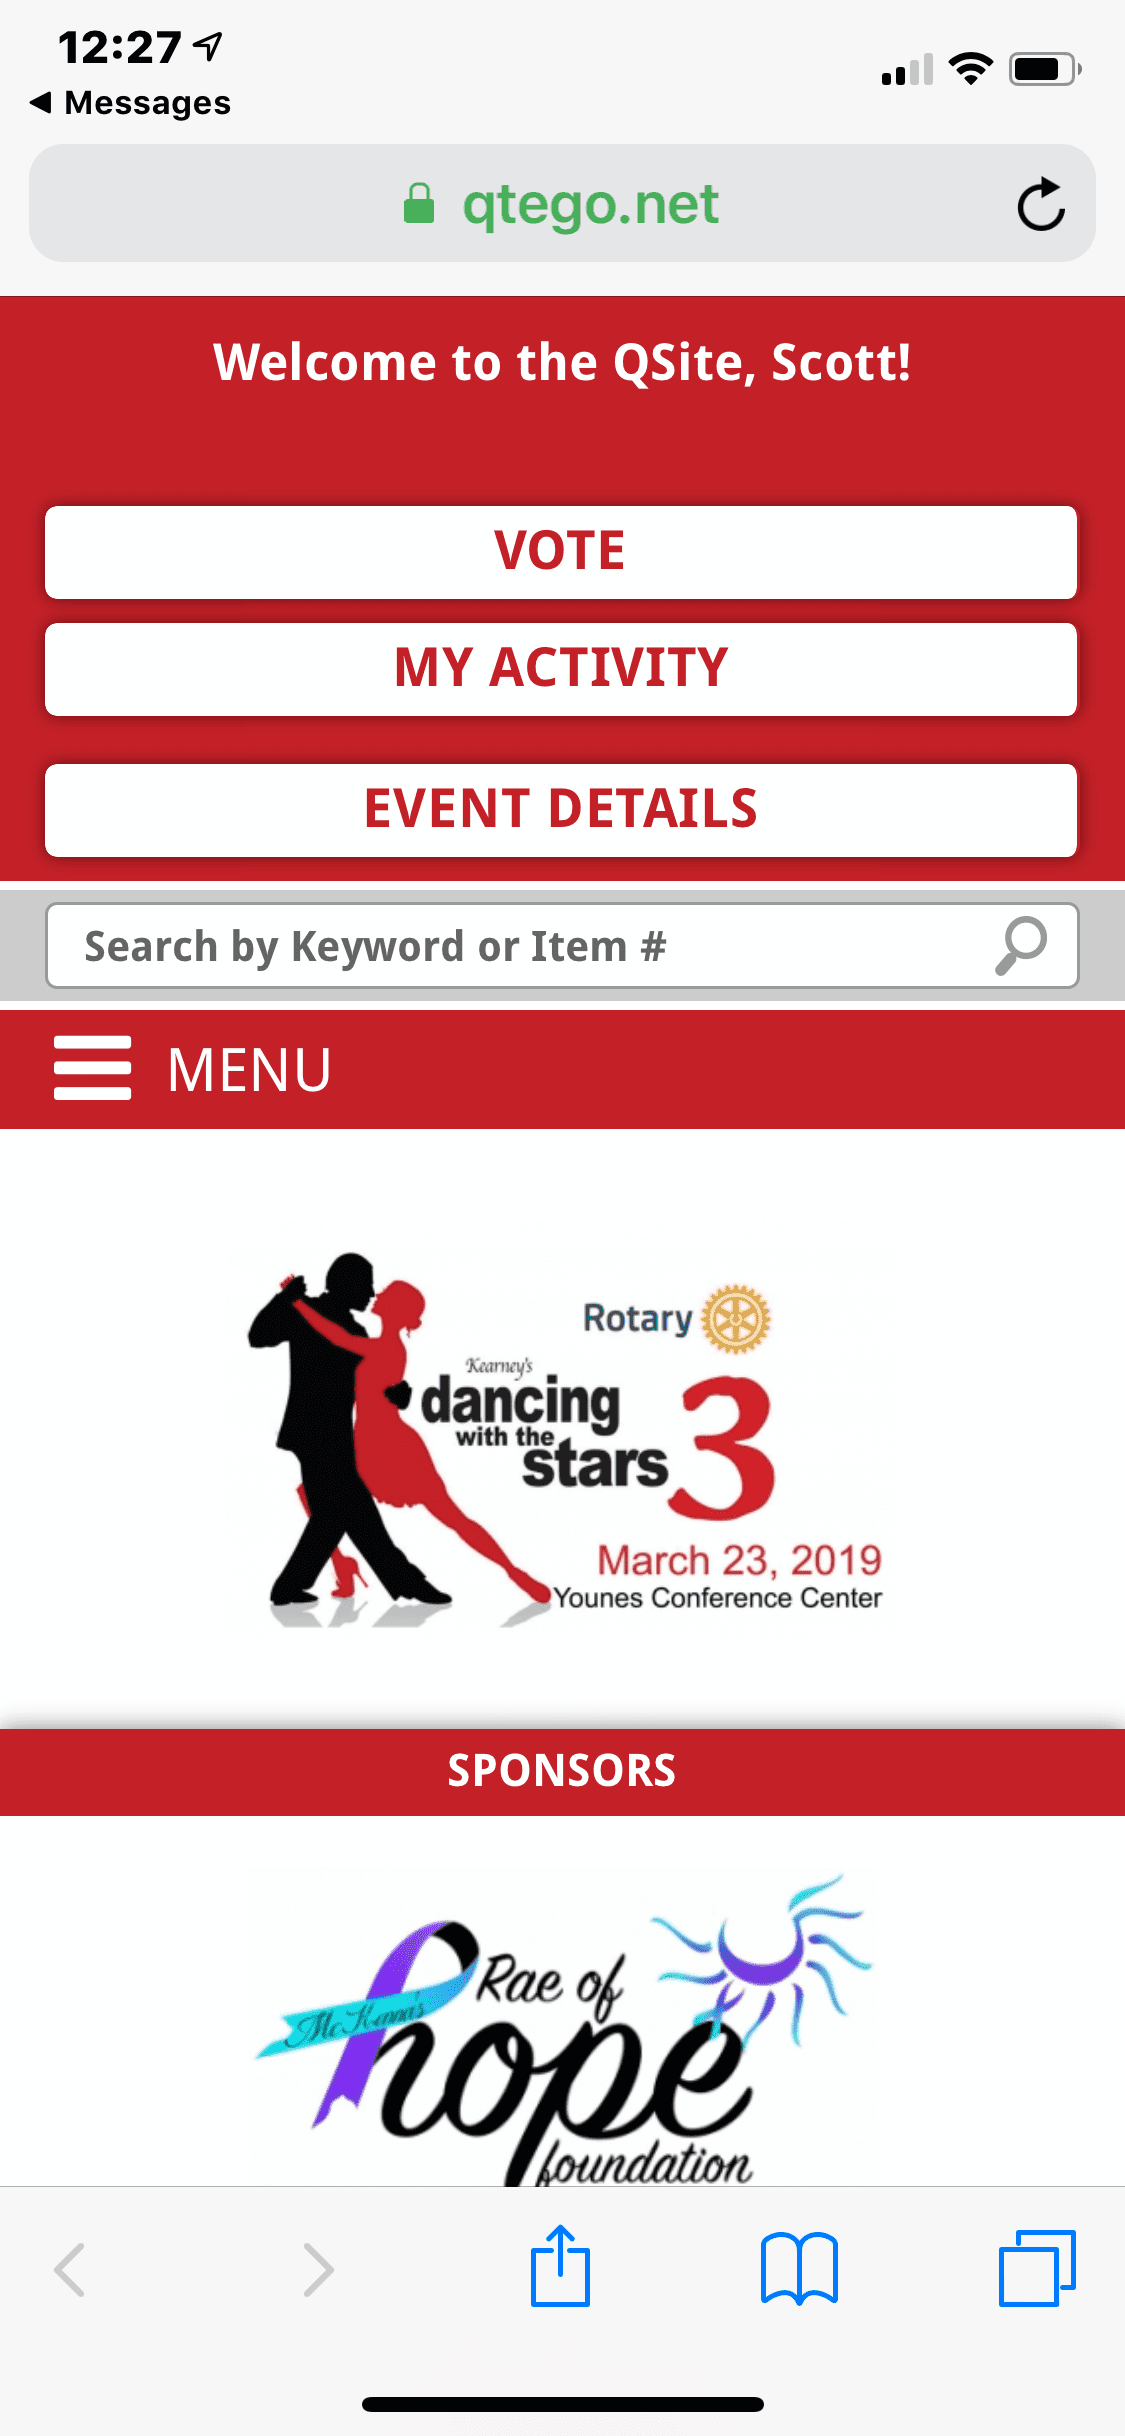 Qtego Auction Services & Kearney's Dancing with the Stars 3